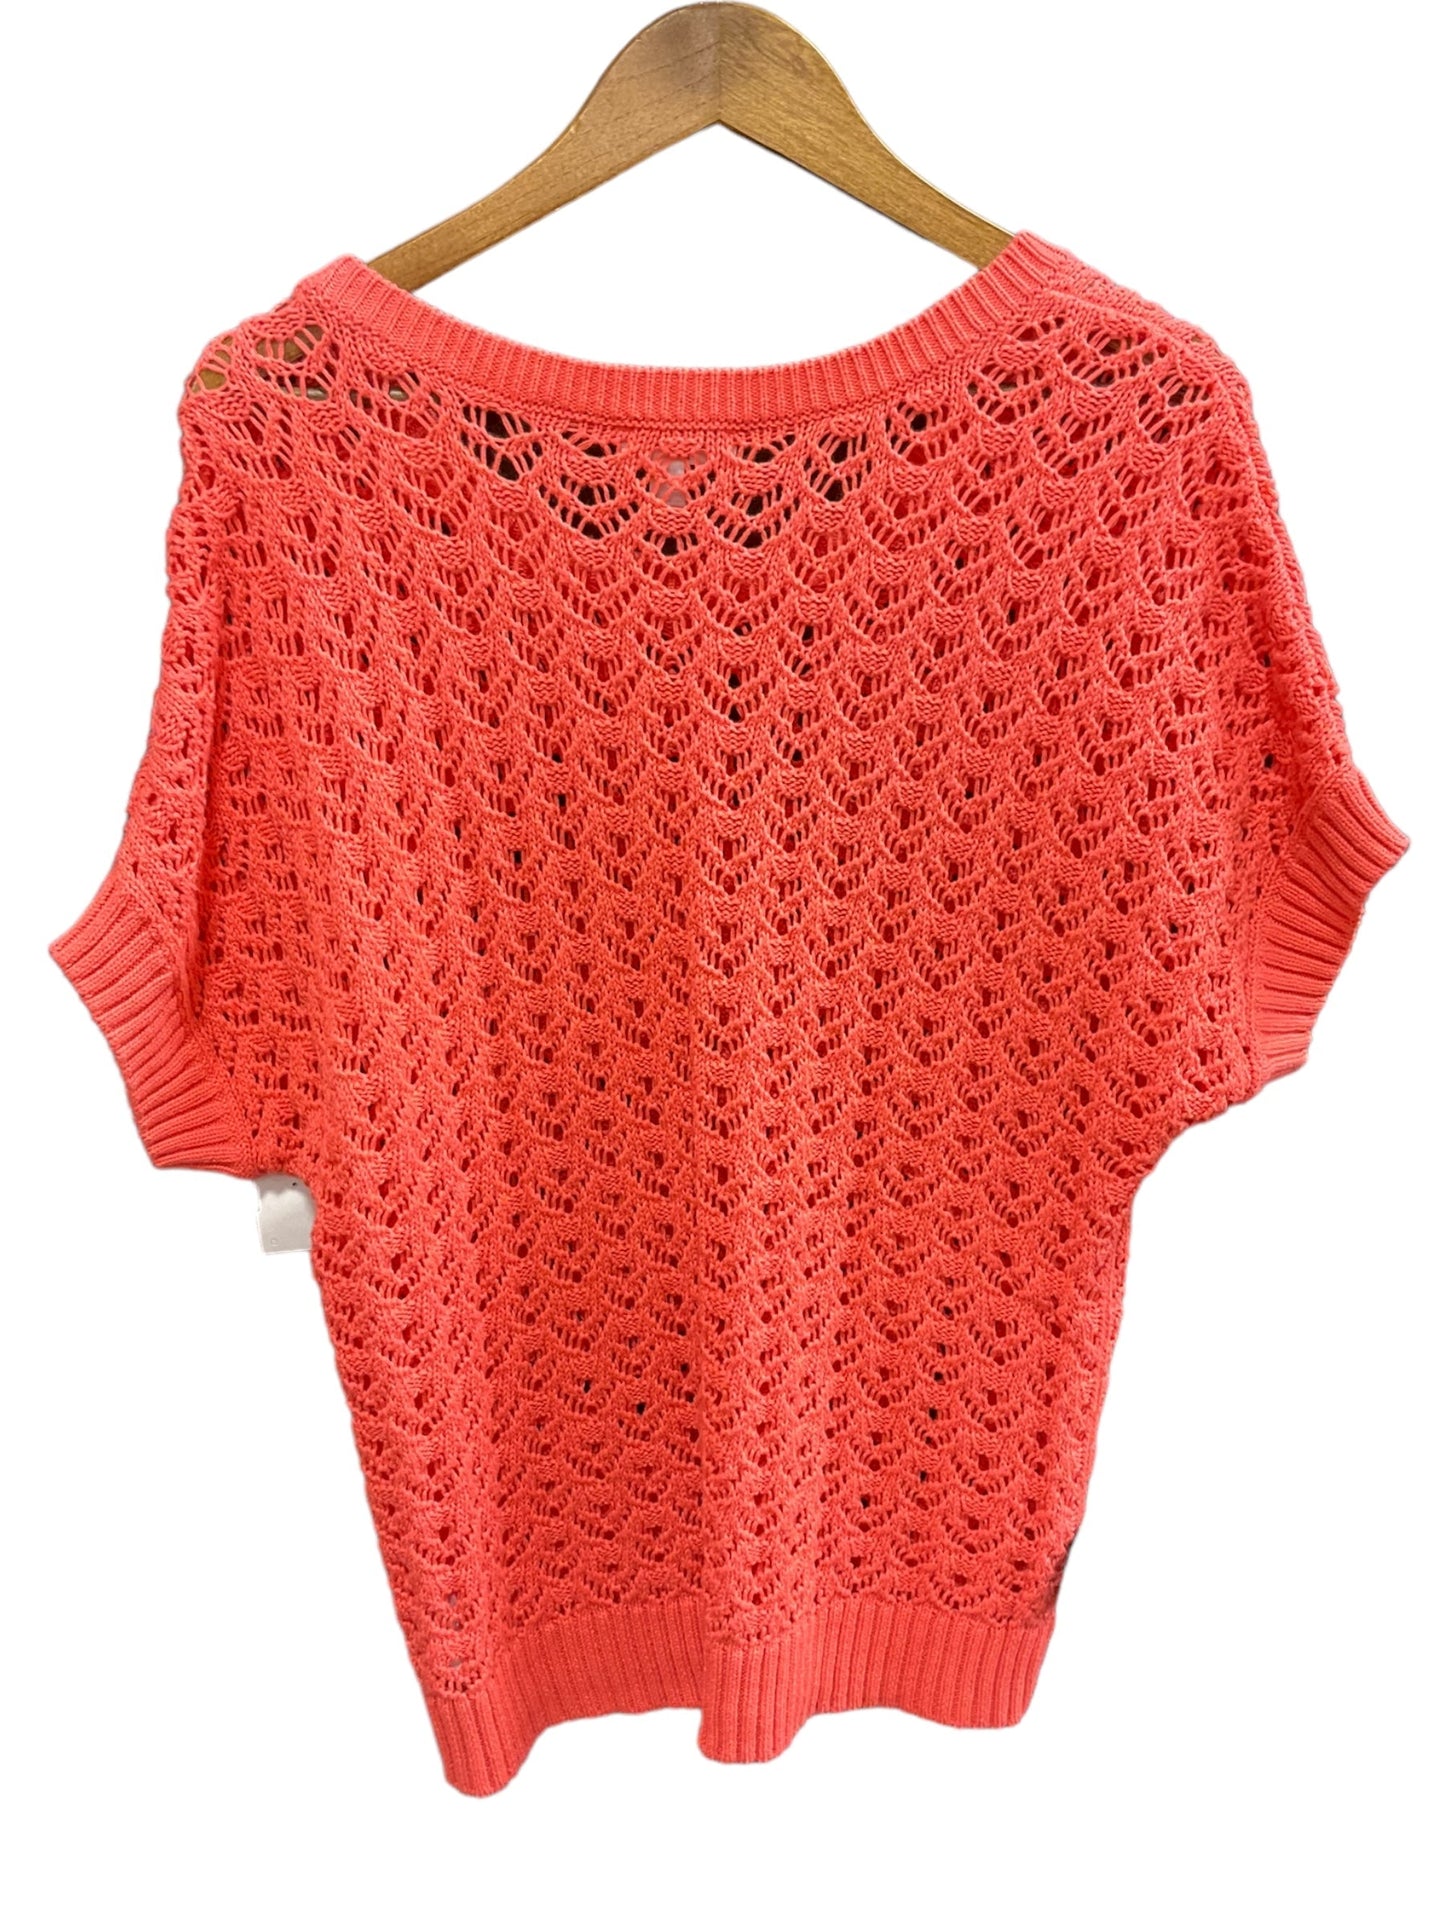 Coral Sweater Short Sleeve St Johns Bay O, Size L